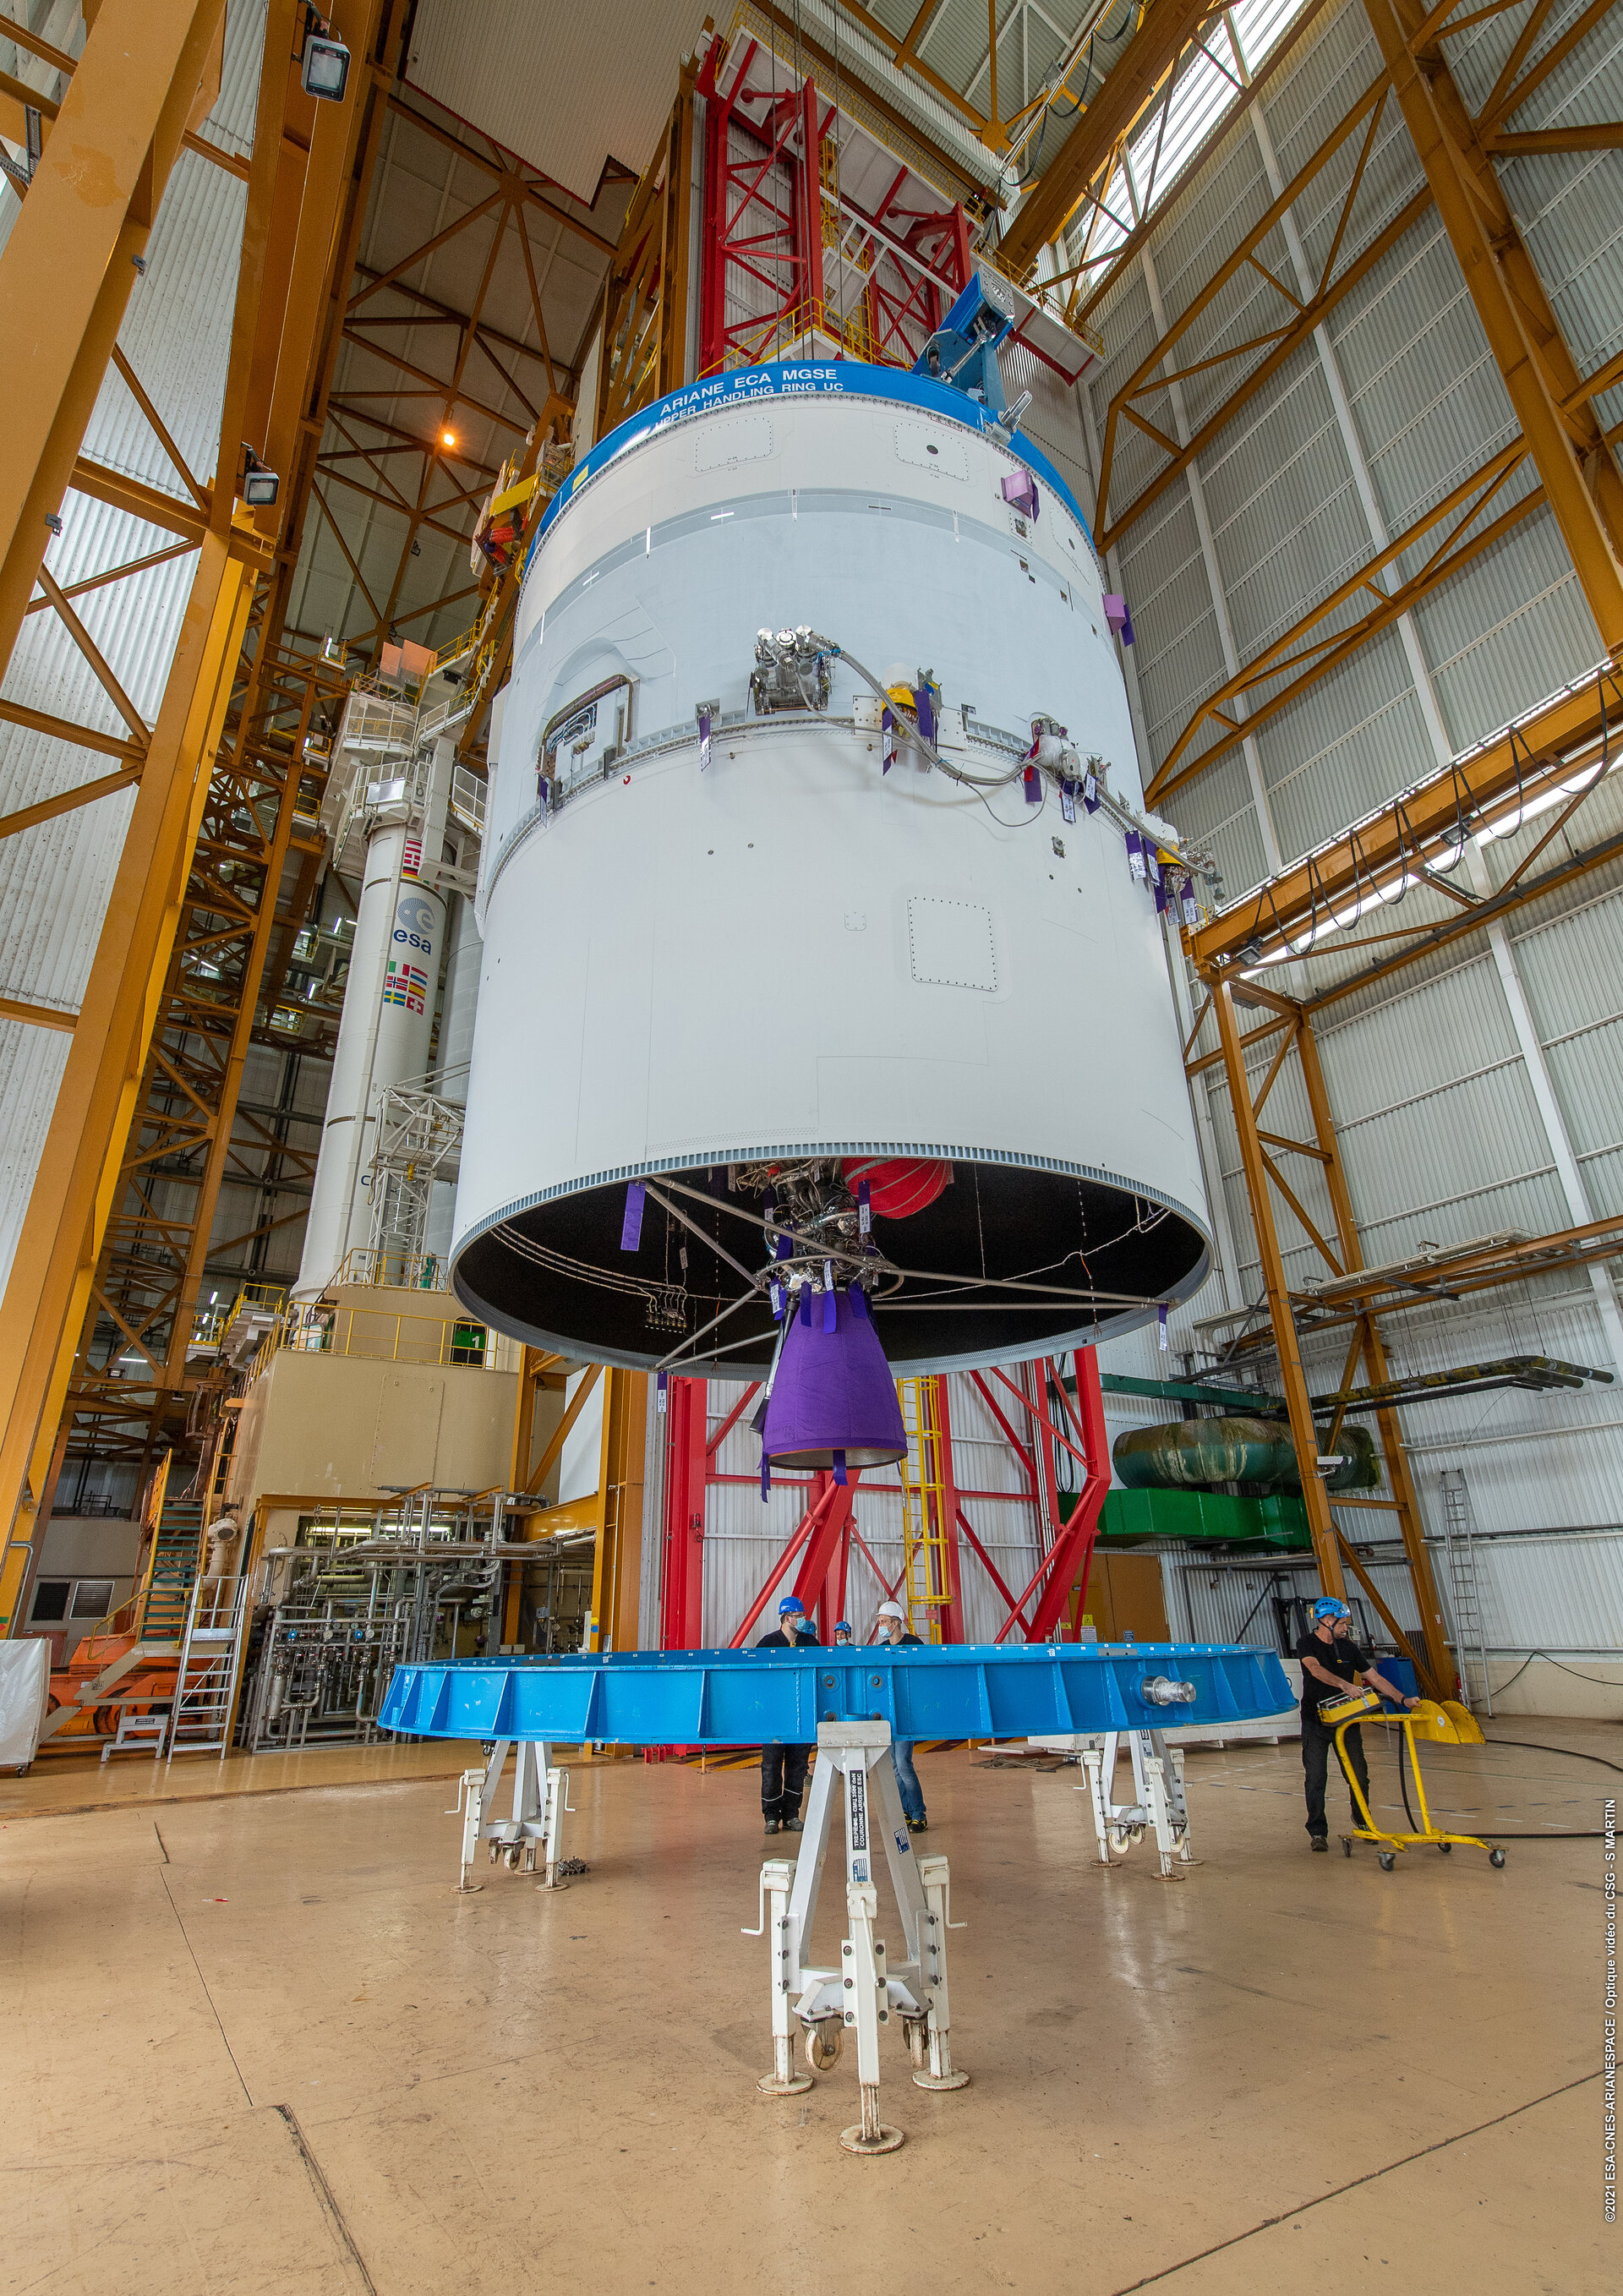 Webb’s Ariane 5 upper stage was raised vertical in the launch vehicle integration building at Europe’s Spaceport in French Guiana